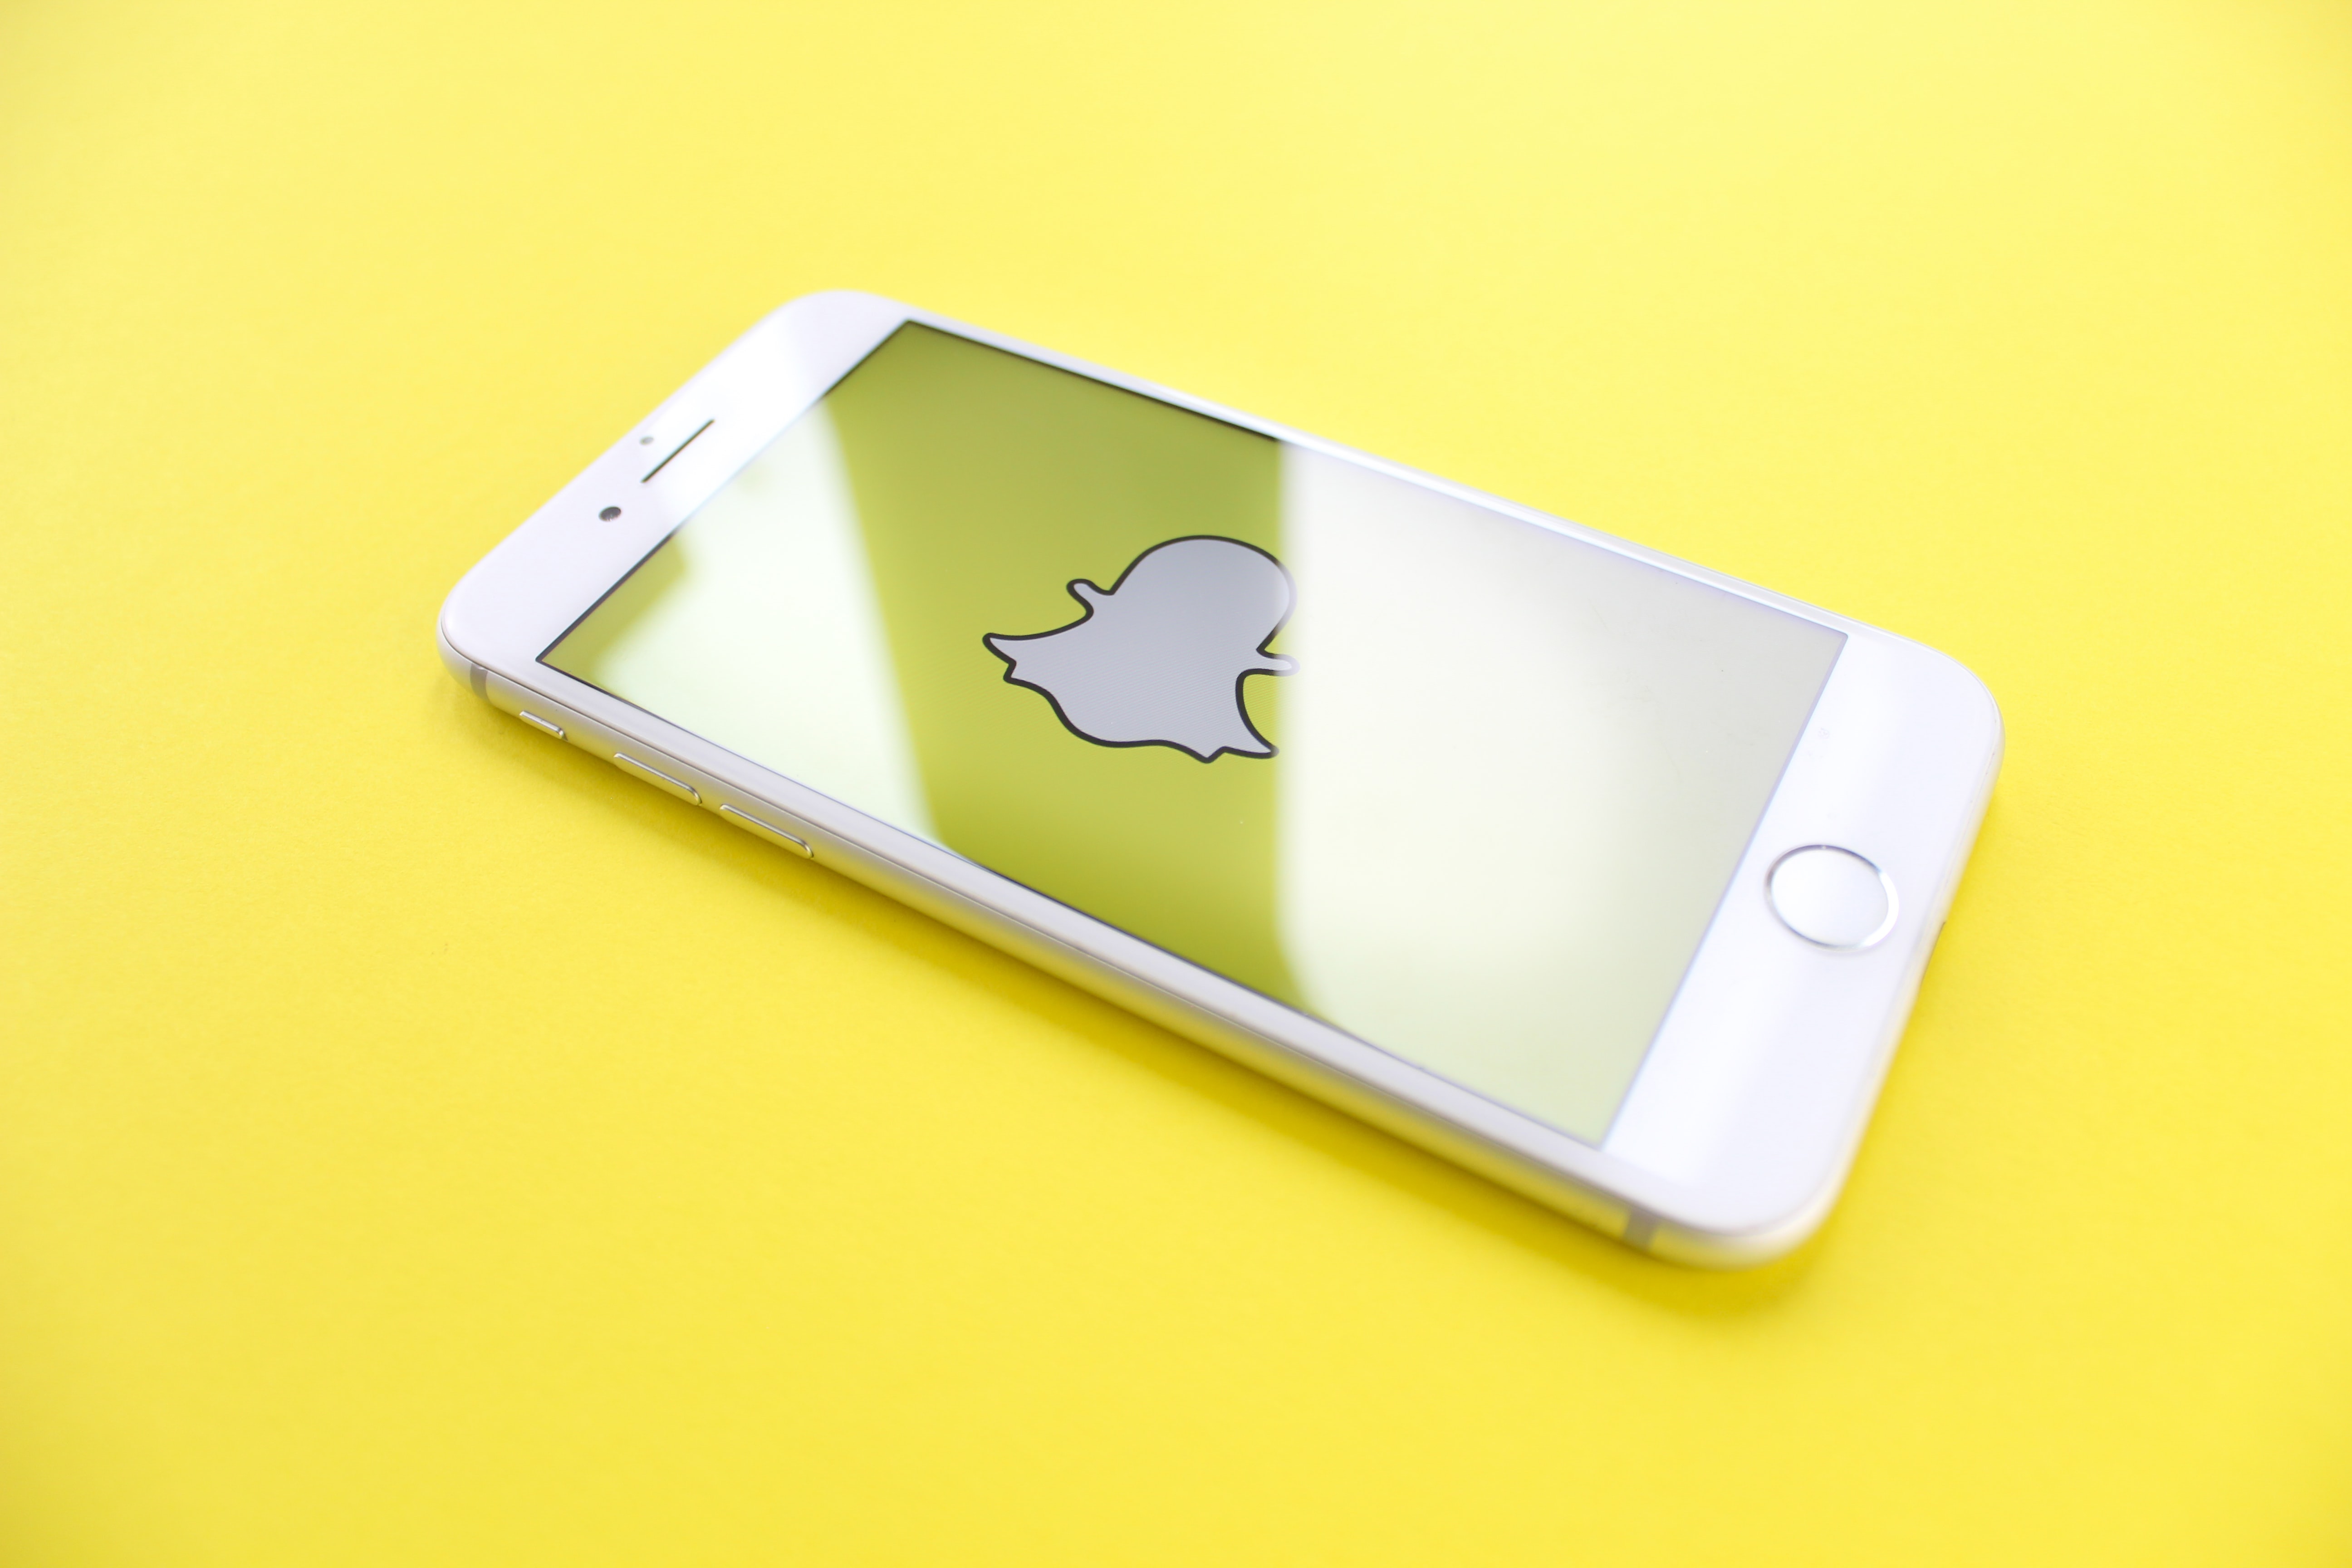 Snapchat: Tech Innovation at the Forefront